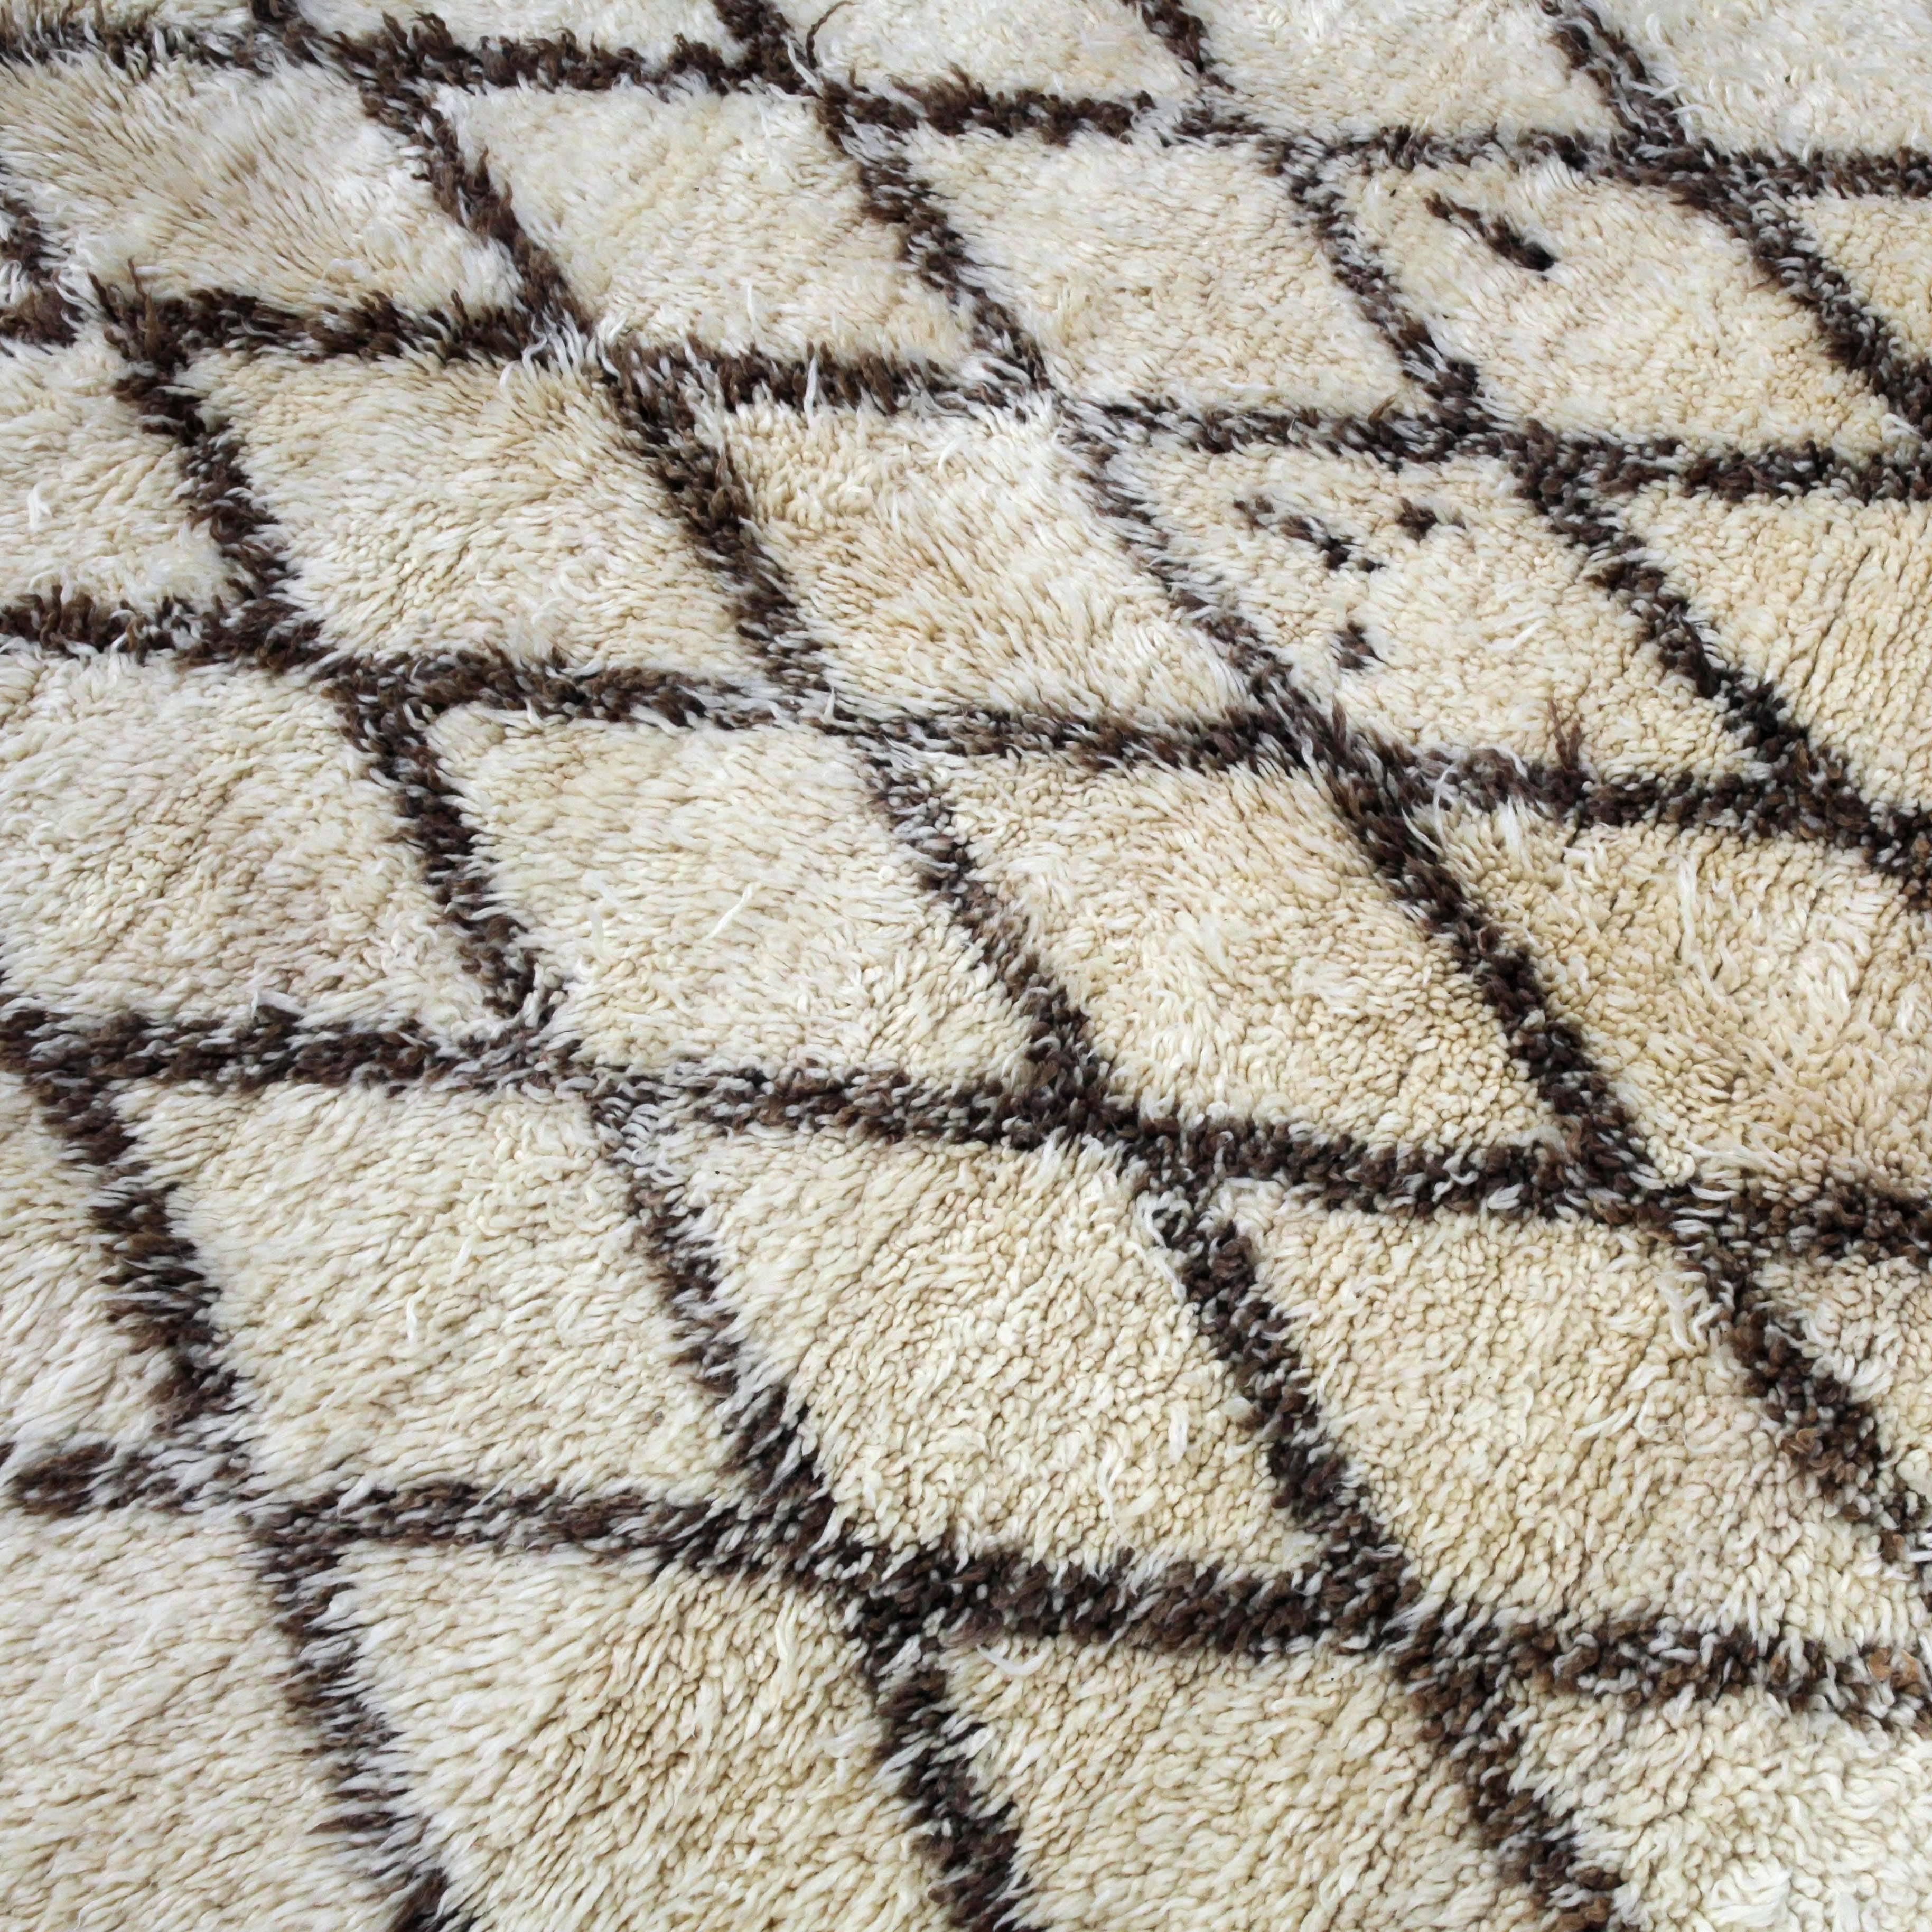 A wonderful array of subtle browns set the mood for this traditional tribal pattern. The Beni Ouarain tribe produces some of the finest quality rugs in all of Morocco. Usually made of natural ivory and black or brown wool as the pattern, these rugs